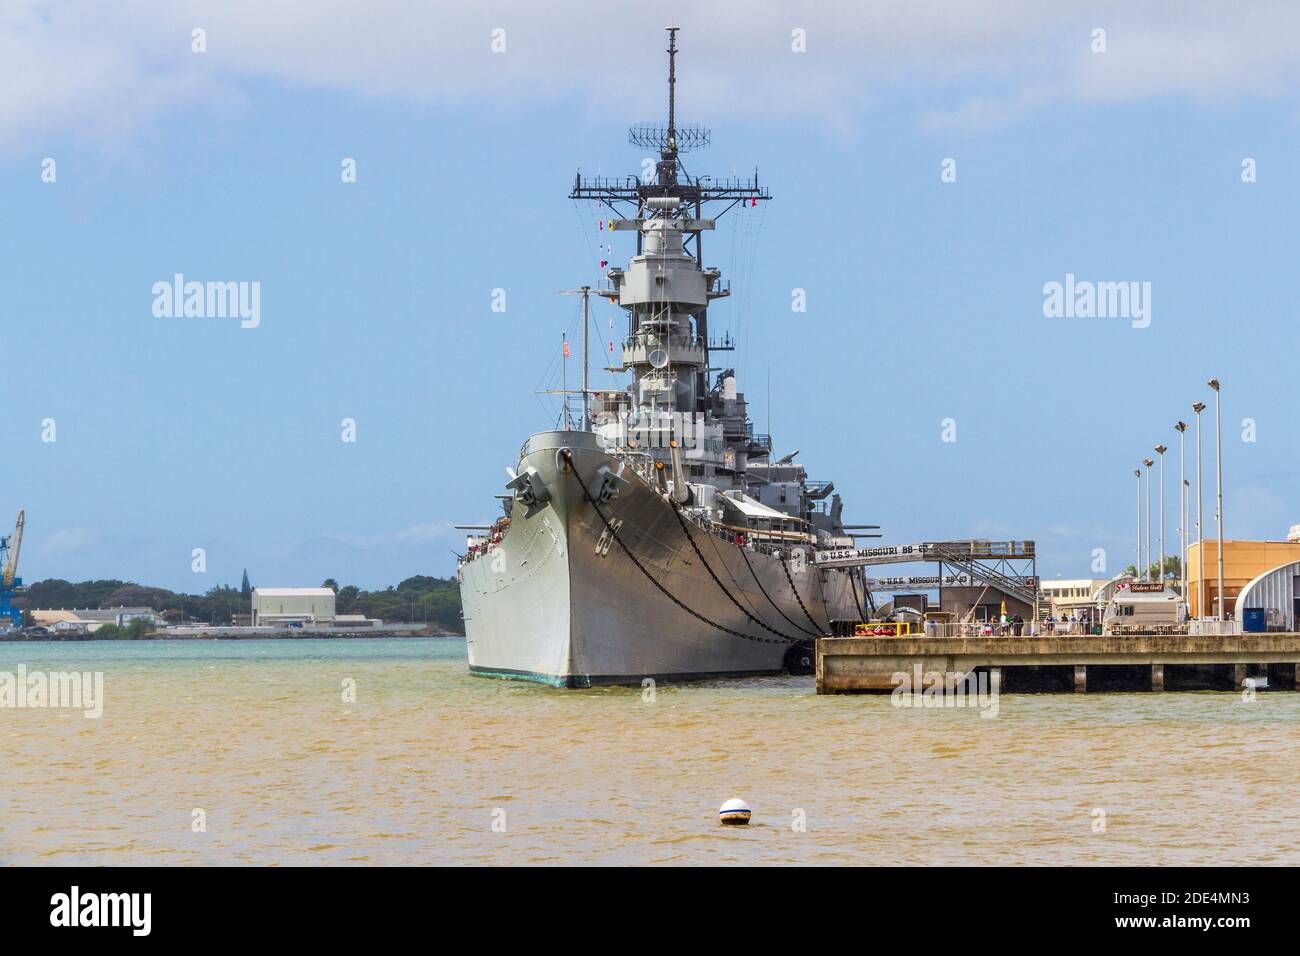 USS Missouri (BB-63) ('Mighty Mo' or 'Big Mo') is a United States Navy Iowa-class battleship located at Pearl Harbor National Memorial, Hawaii. Stock Photo